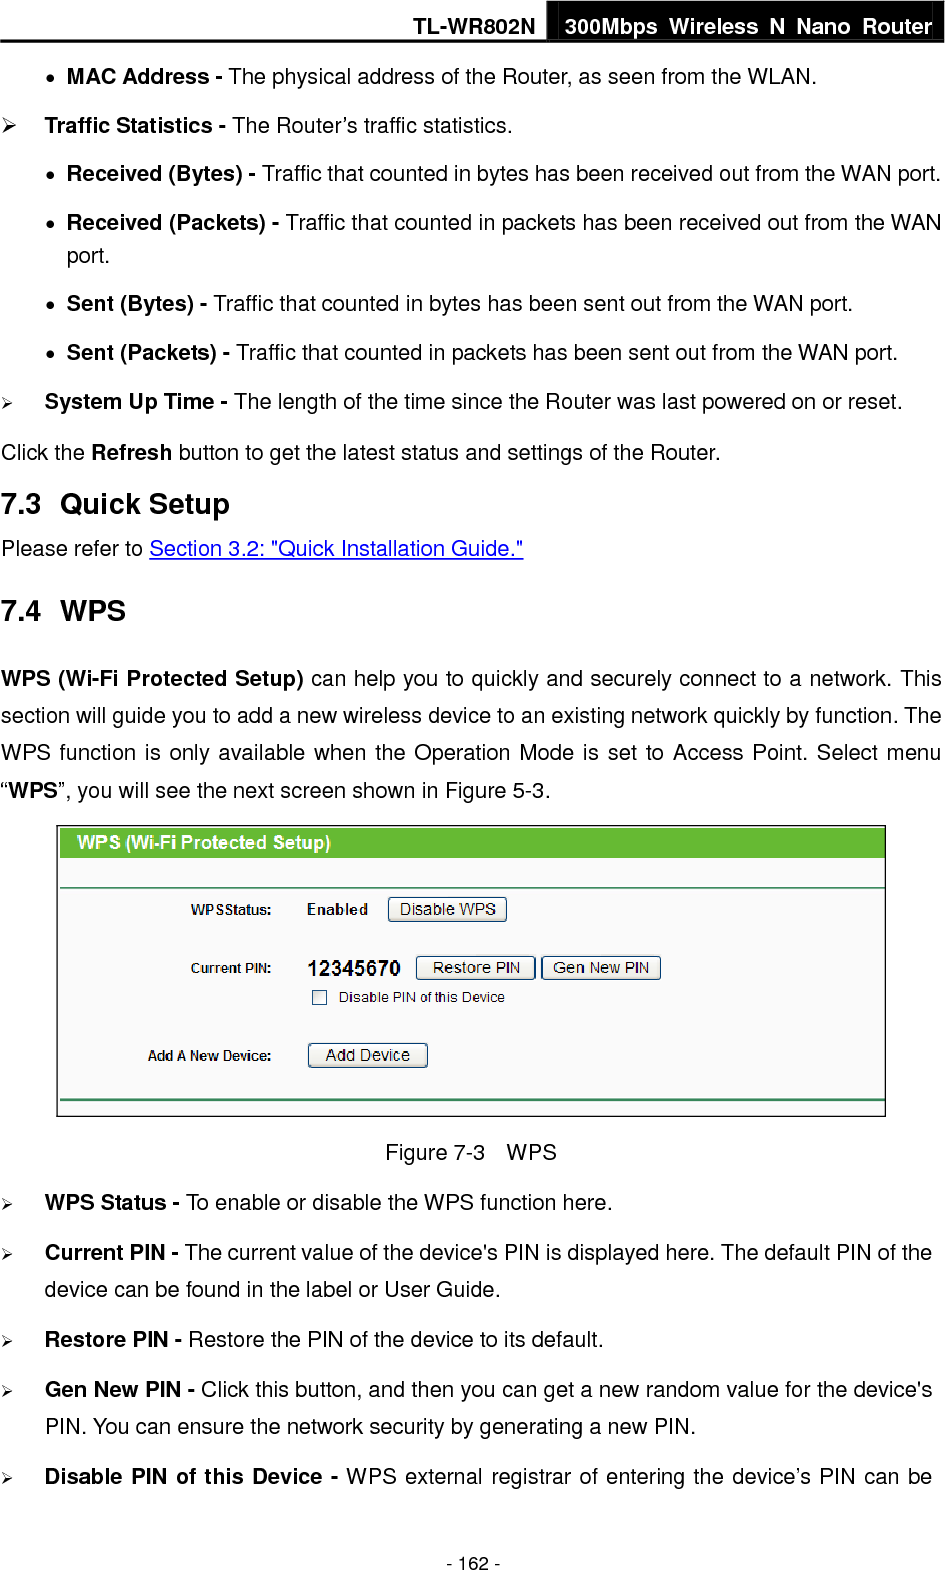 TL-WR802N 300Mbps  Wireless  N  Nano  Router  - 162 -  MAC Address - The physical address of the Router, as seen from the WLAN.  Traffic Statistics - The Router’s traffic statistics.  Received (Bytes) - Traffic that counted in bytes has been received out from the WAN port.  Received (Packets) - Traffic that counted in packets has been received out from the WAN port.  Sent (Bytes) - Traffic that counted in bytes has been sent out from the WAN port.  Sent (Packets) - Traffic that counted in packets has been sent out from the WAN port.  System Up Time - The length of the time since the Router was last powered on or reset. Click the Refresh button to get the latest status and settings of the Router. 7.3  Quick Setup Please refer to Section 3.2: &quot;Quick Installation Guide.&quot; 7.4  WPS WPS (Wi-Fi Protected Setup) can help you to quickly and securely connect to a network. This section will guide you to add a new wireless device to an existing network quickly by function. The WPS function is only available when the Operation Mode is set to Access Point. Select menu “WPS”, you will see the next screen shown in Figure 5-3.    Figure 7-3  WPS  WPS Status - To enable or disable the WPS function here.    Current PIN - The current value of the device&apos;s PIN is displayed here. The default PIN of the device can be found in the label or User Guide.    Restore PIN - Restore the PIN of the device to its default.    Gen New PIN - Click this button, and then you can get a new random value for the device&apos;s PIN. You can ensure the network security by generating a new PIN.    Disable PIN of this Device - WPS external registrar of entering the device’s PIN can be 